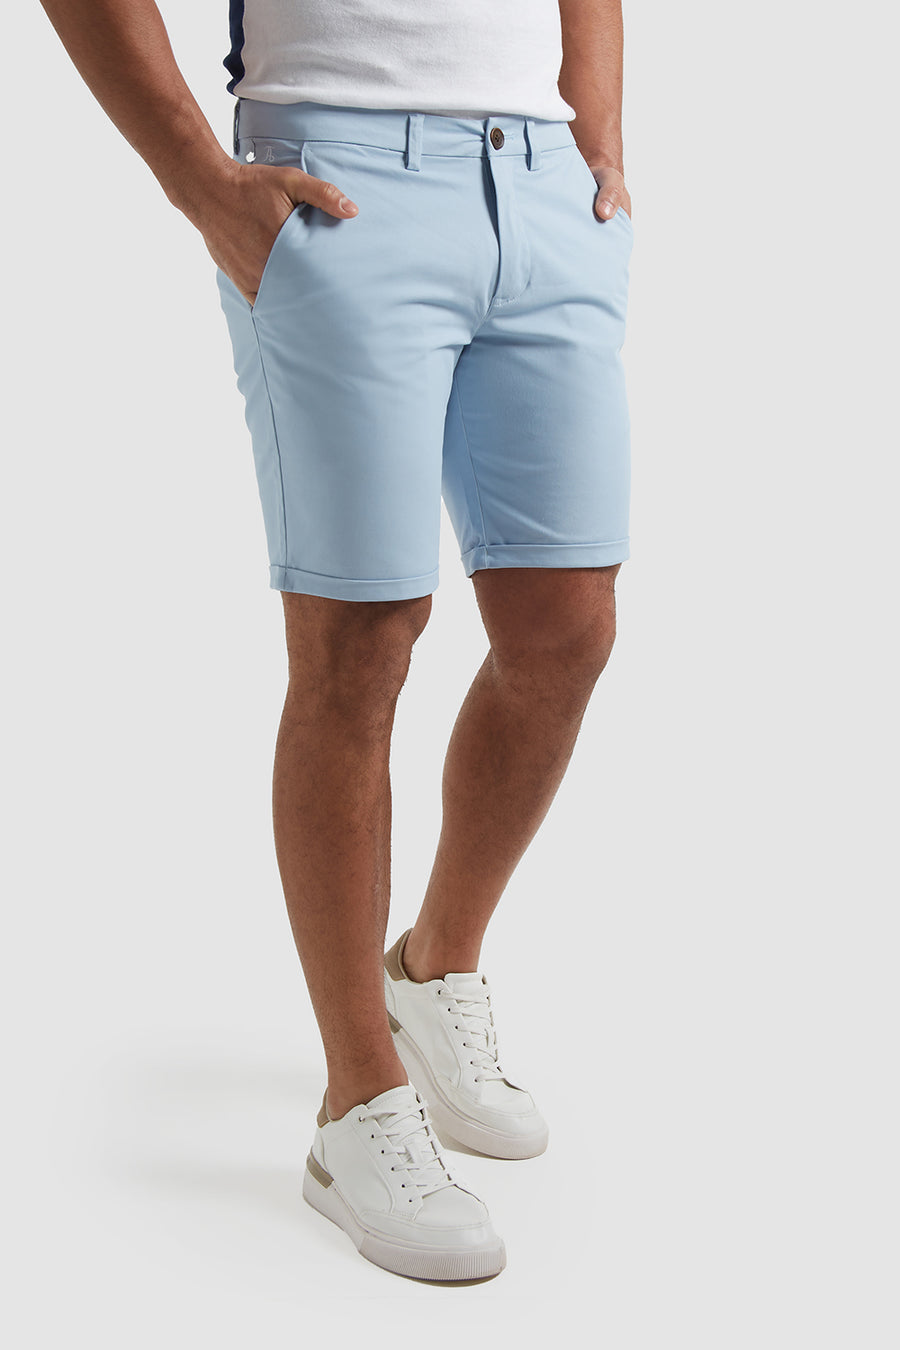 Shorts Chino Athletic - ATHLETE TAILORED - USA Navy in Fit